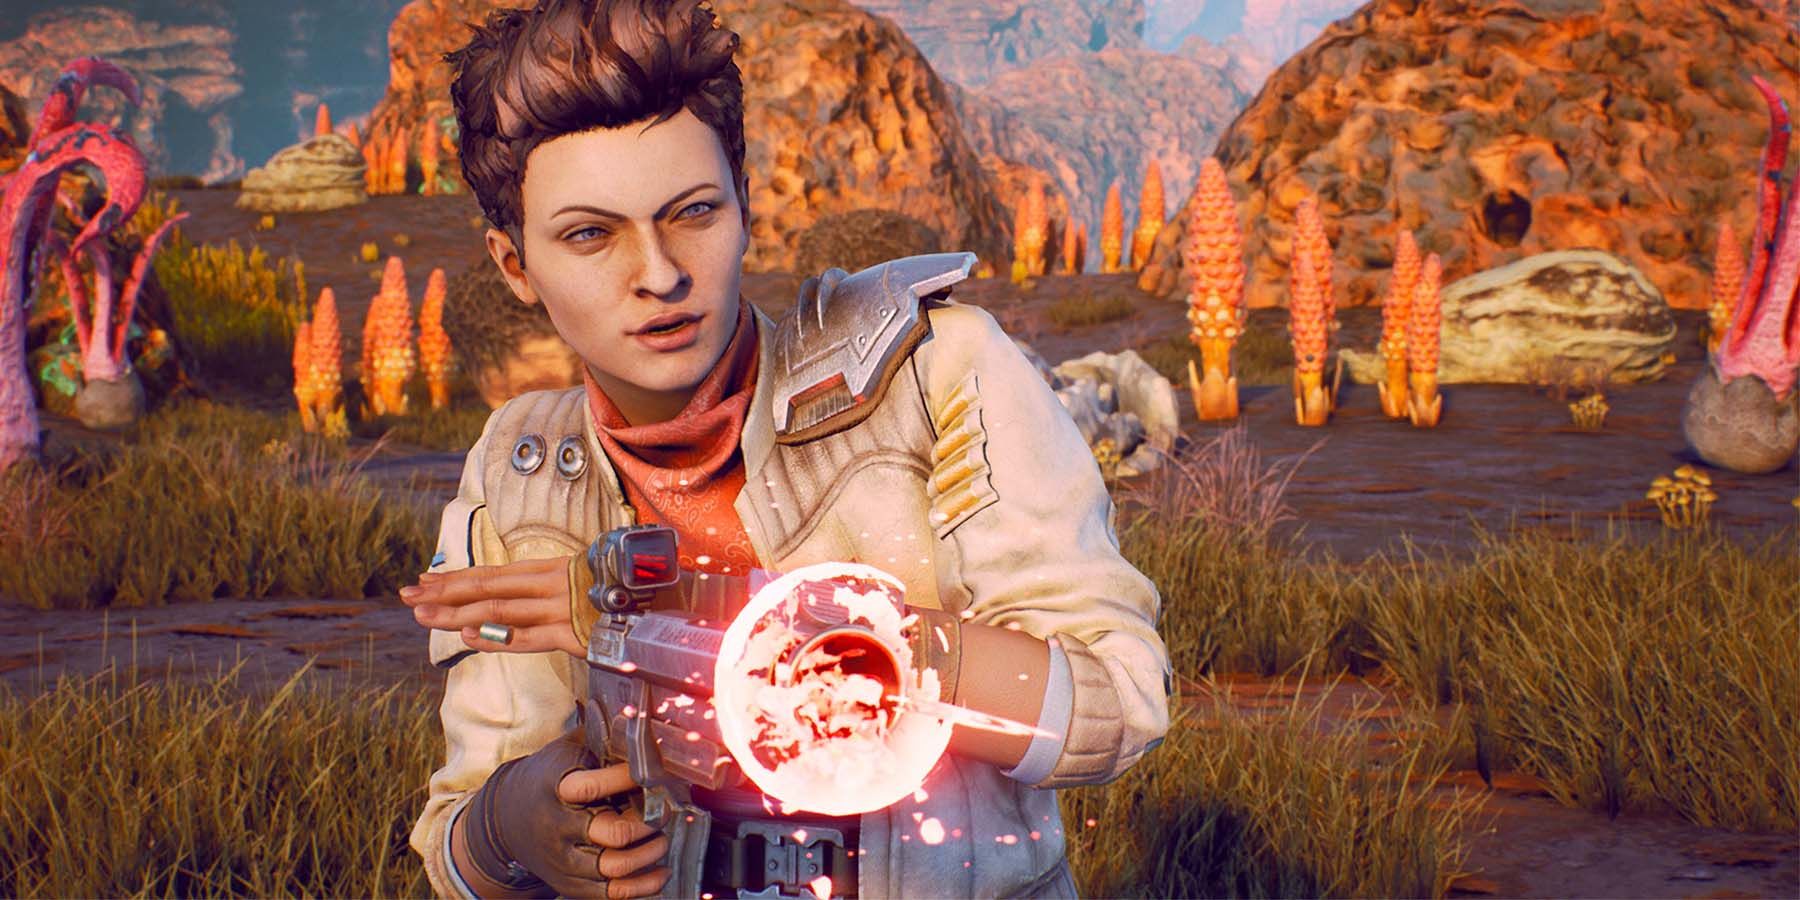 July's Humble Choice line-up has leaked; includes The Outer Worlds